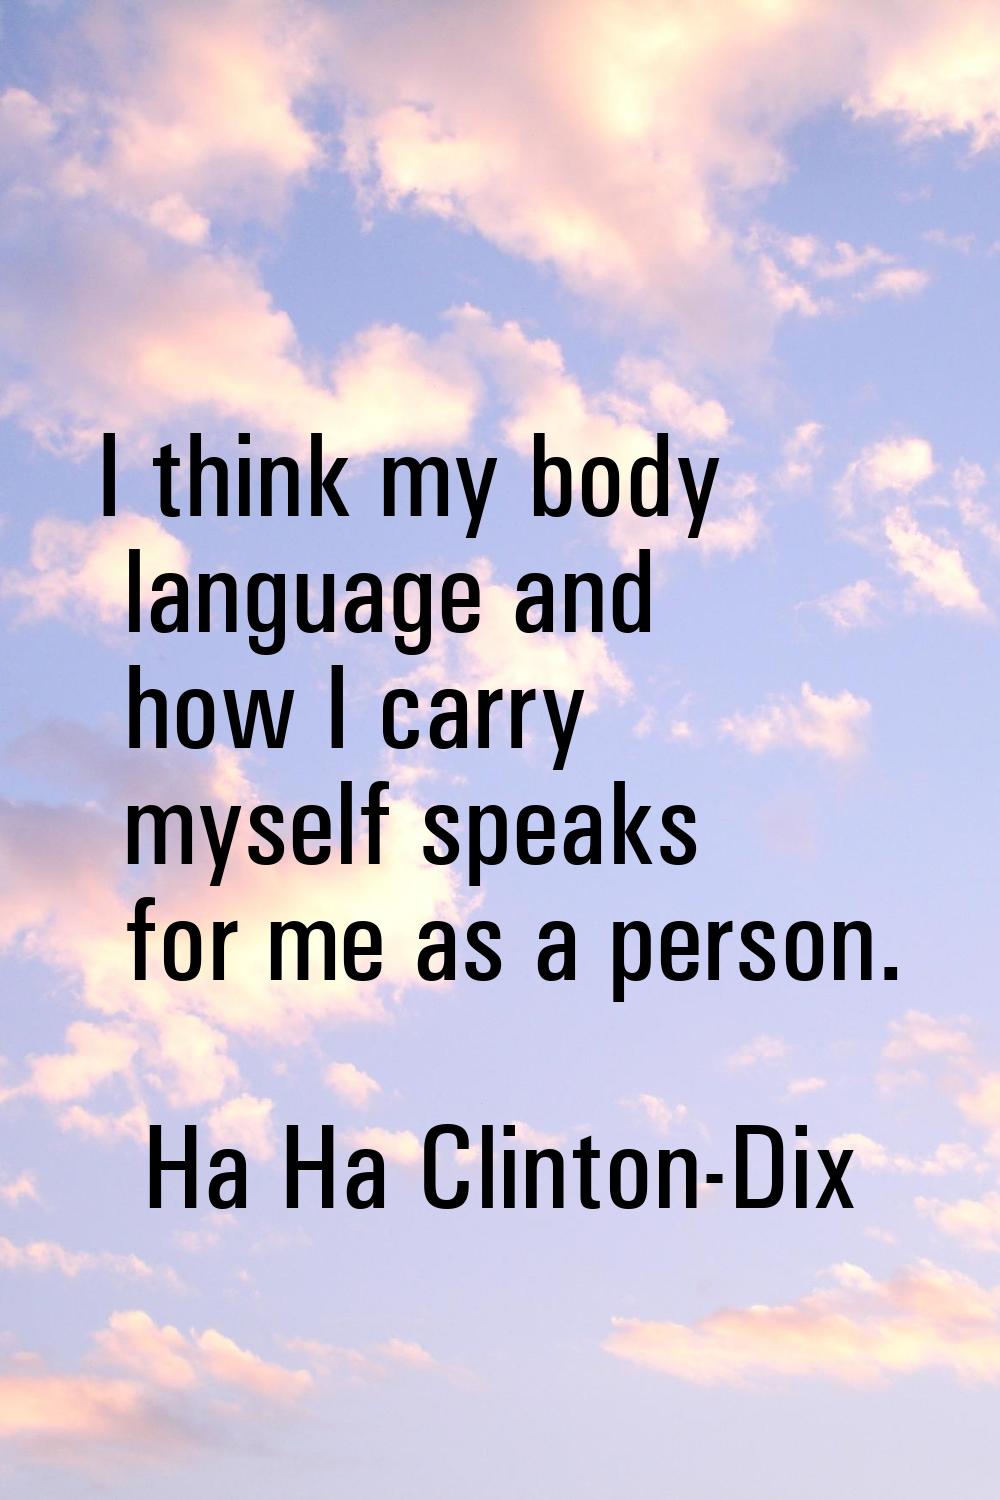 I think my body language and how I carry myself speaks for me as a person.